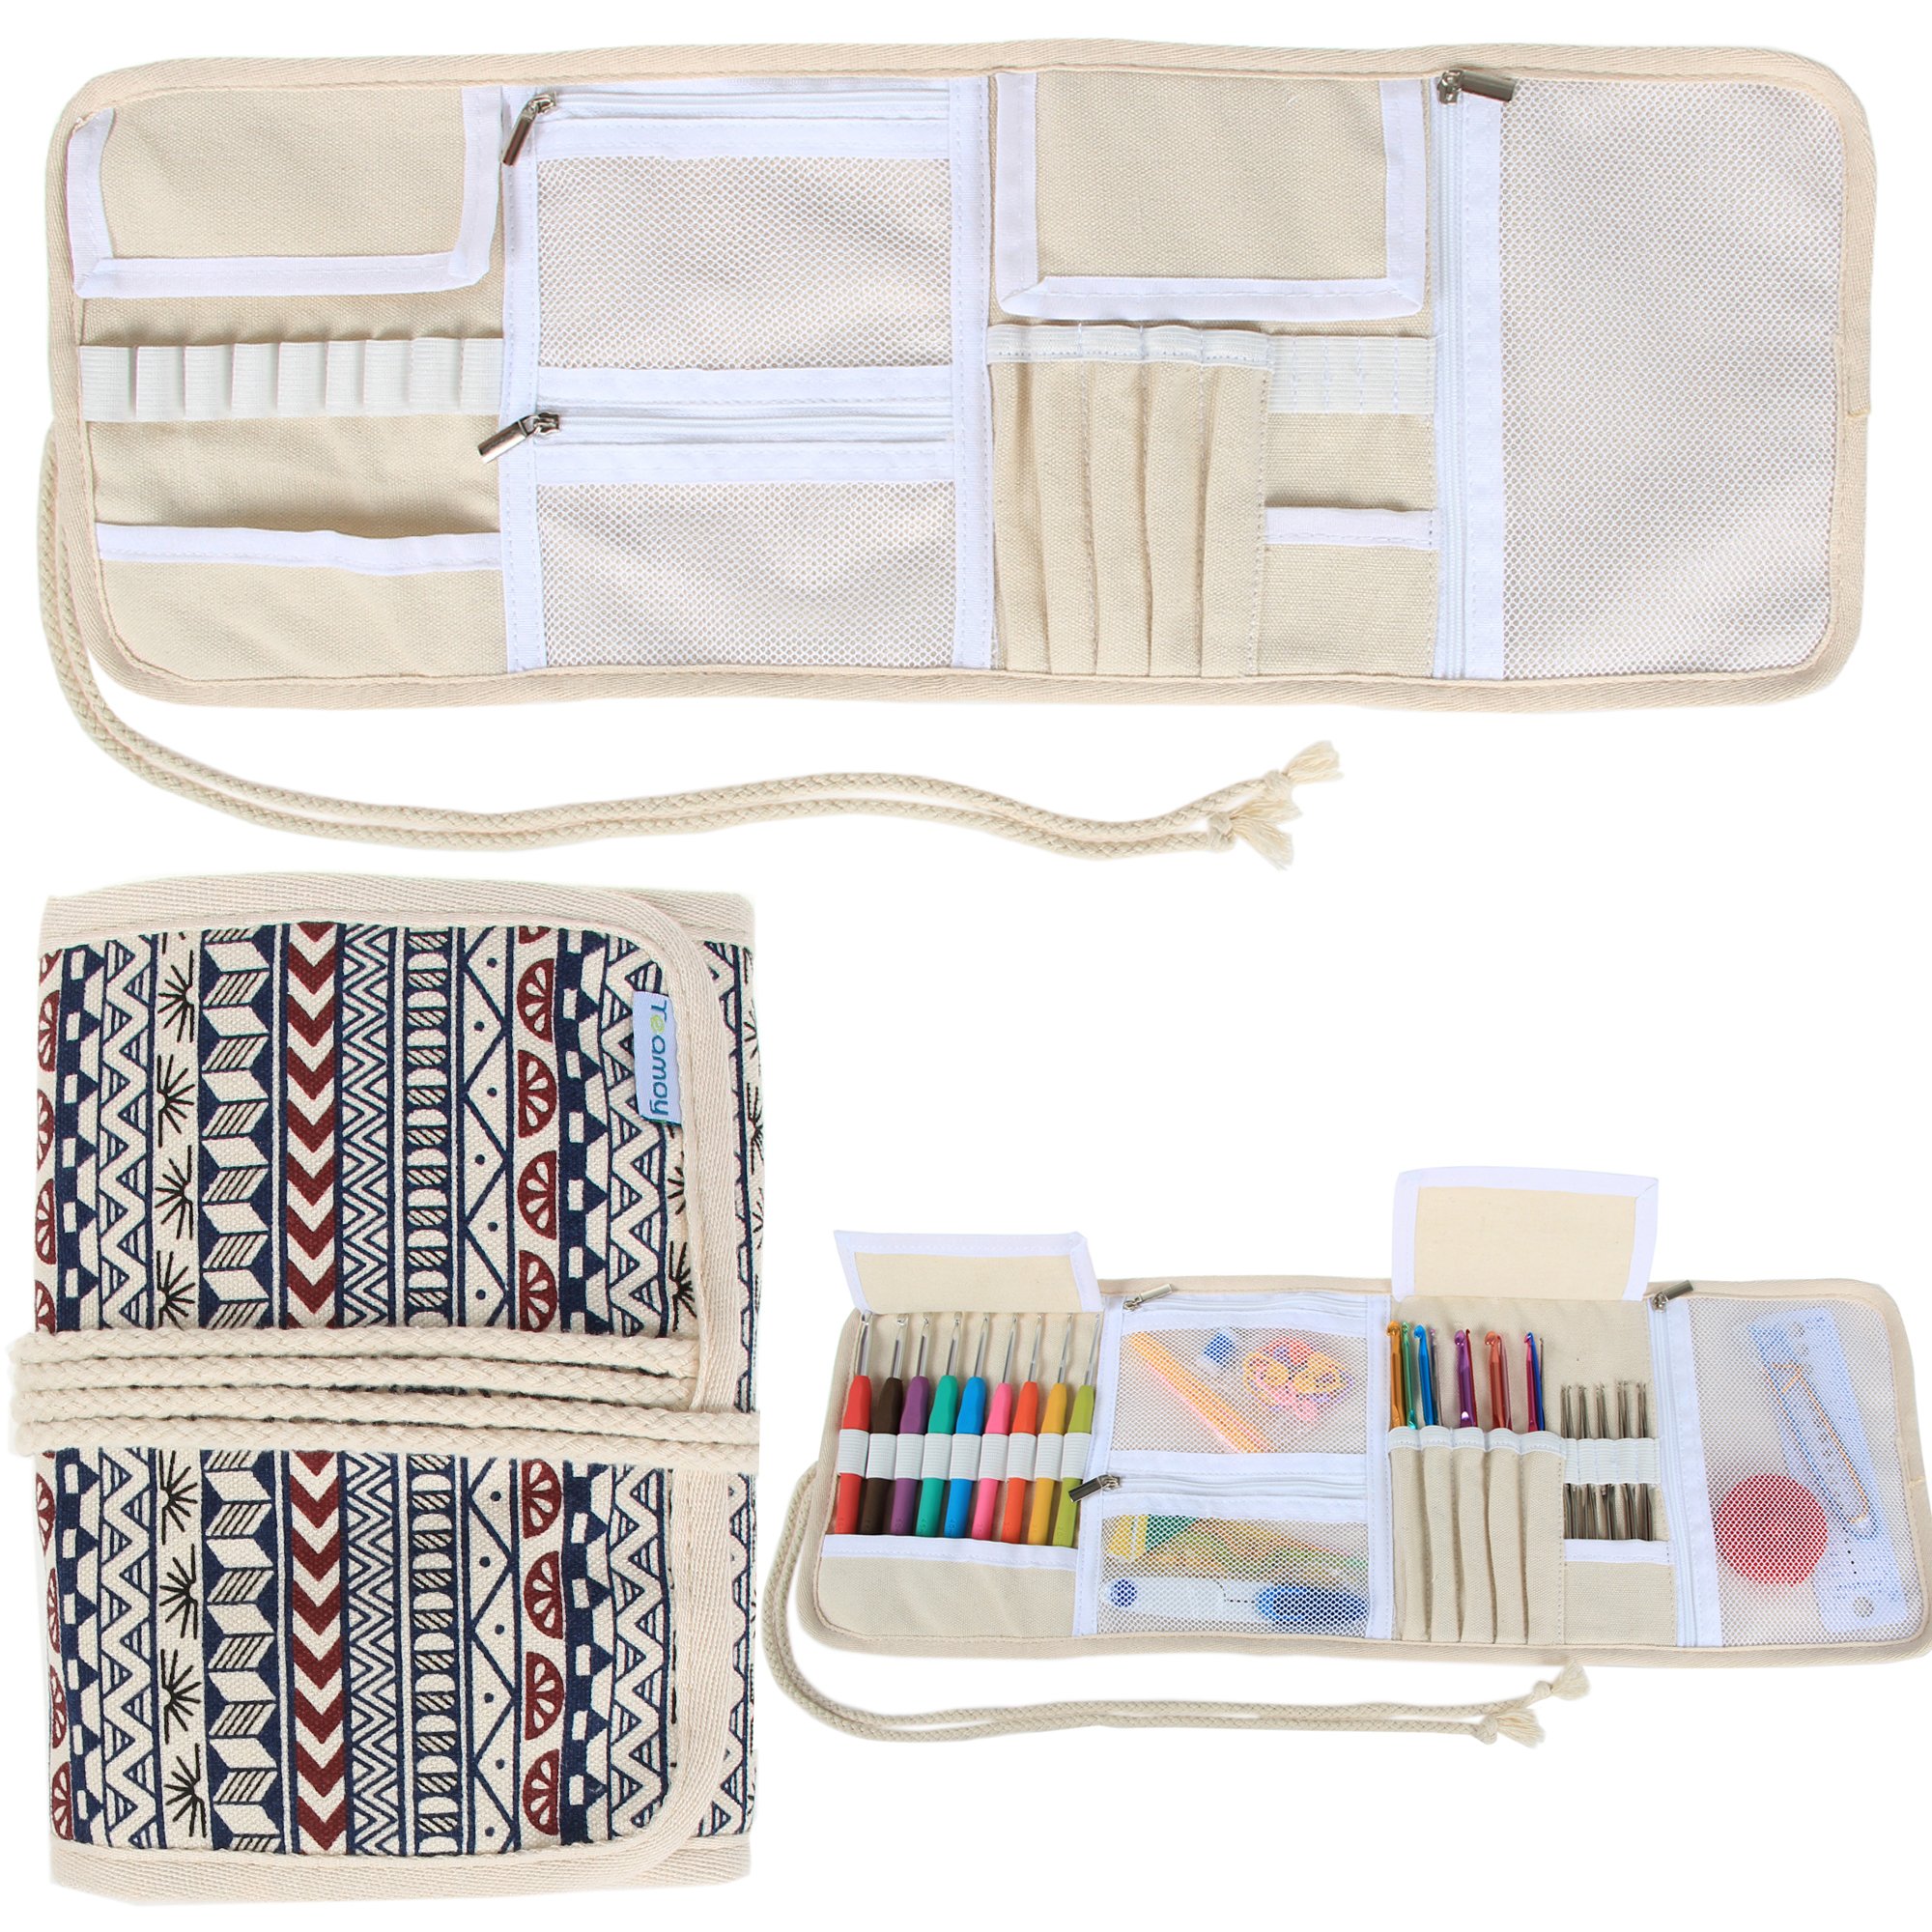  Teamoy Afghan Crochet Hook Case(up to 11 Long